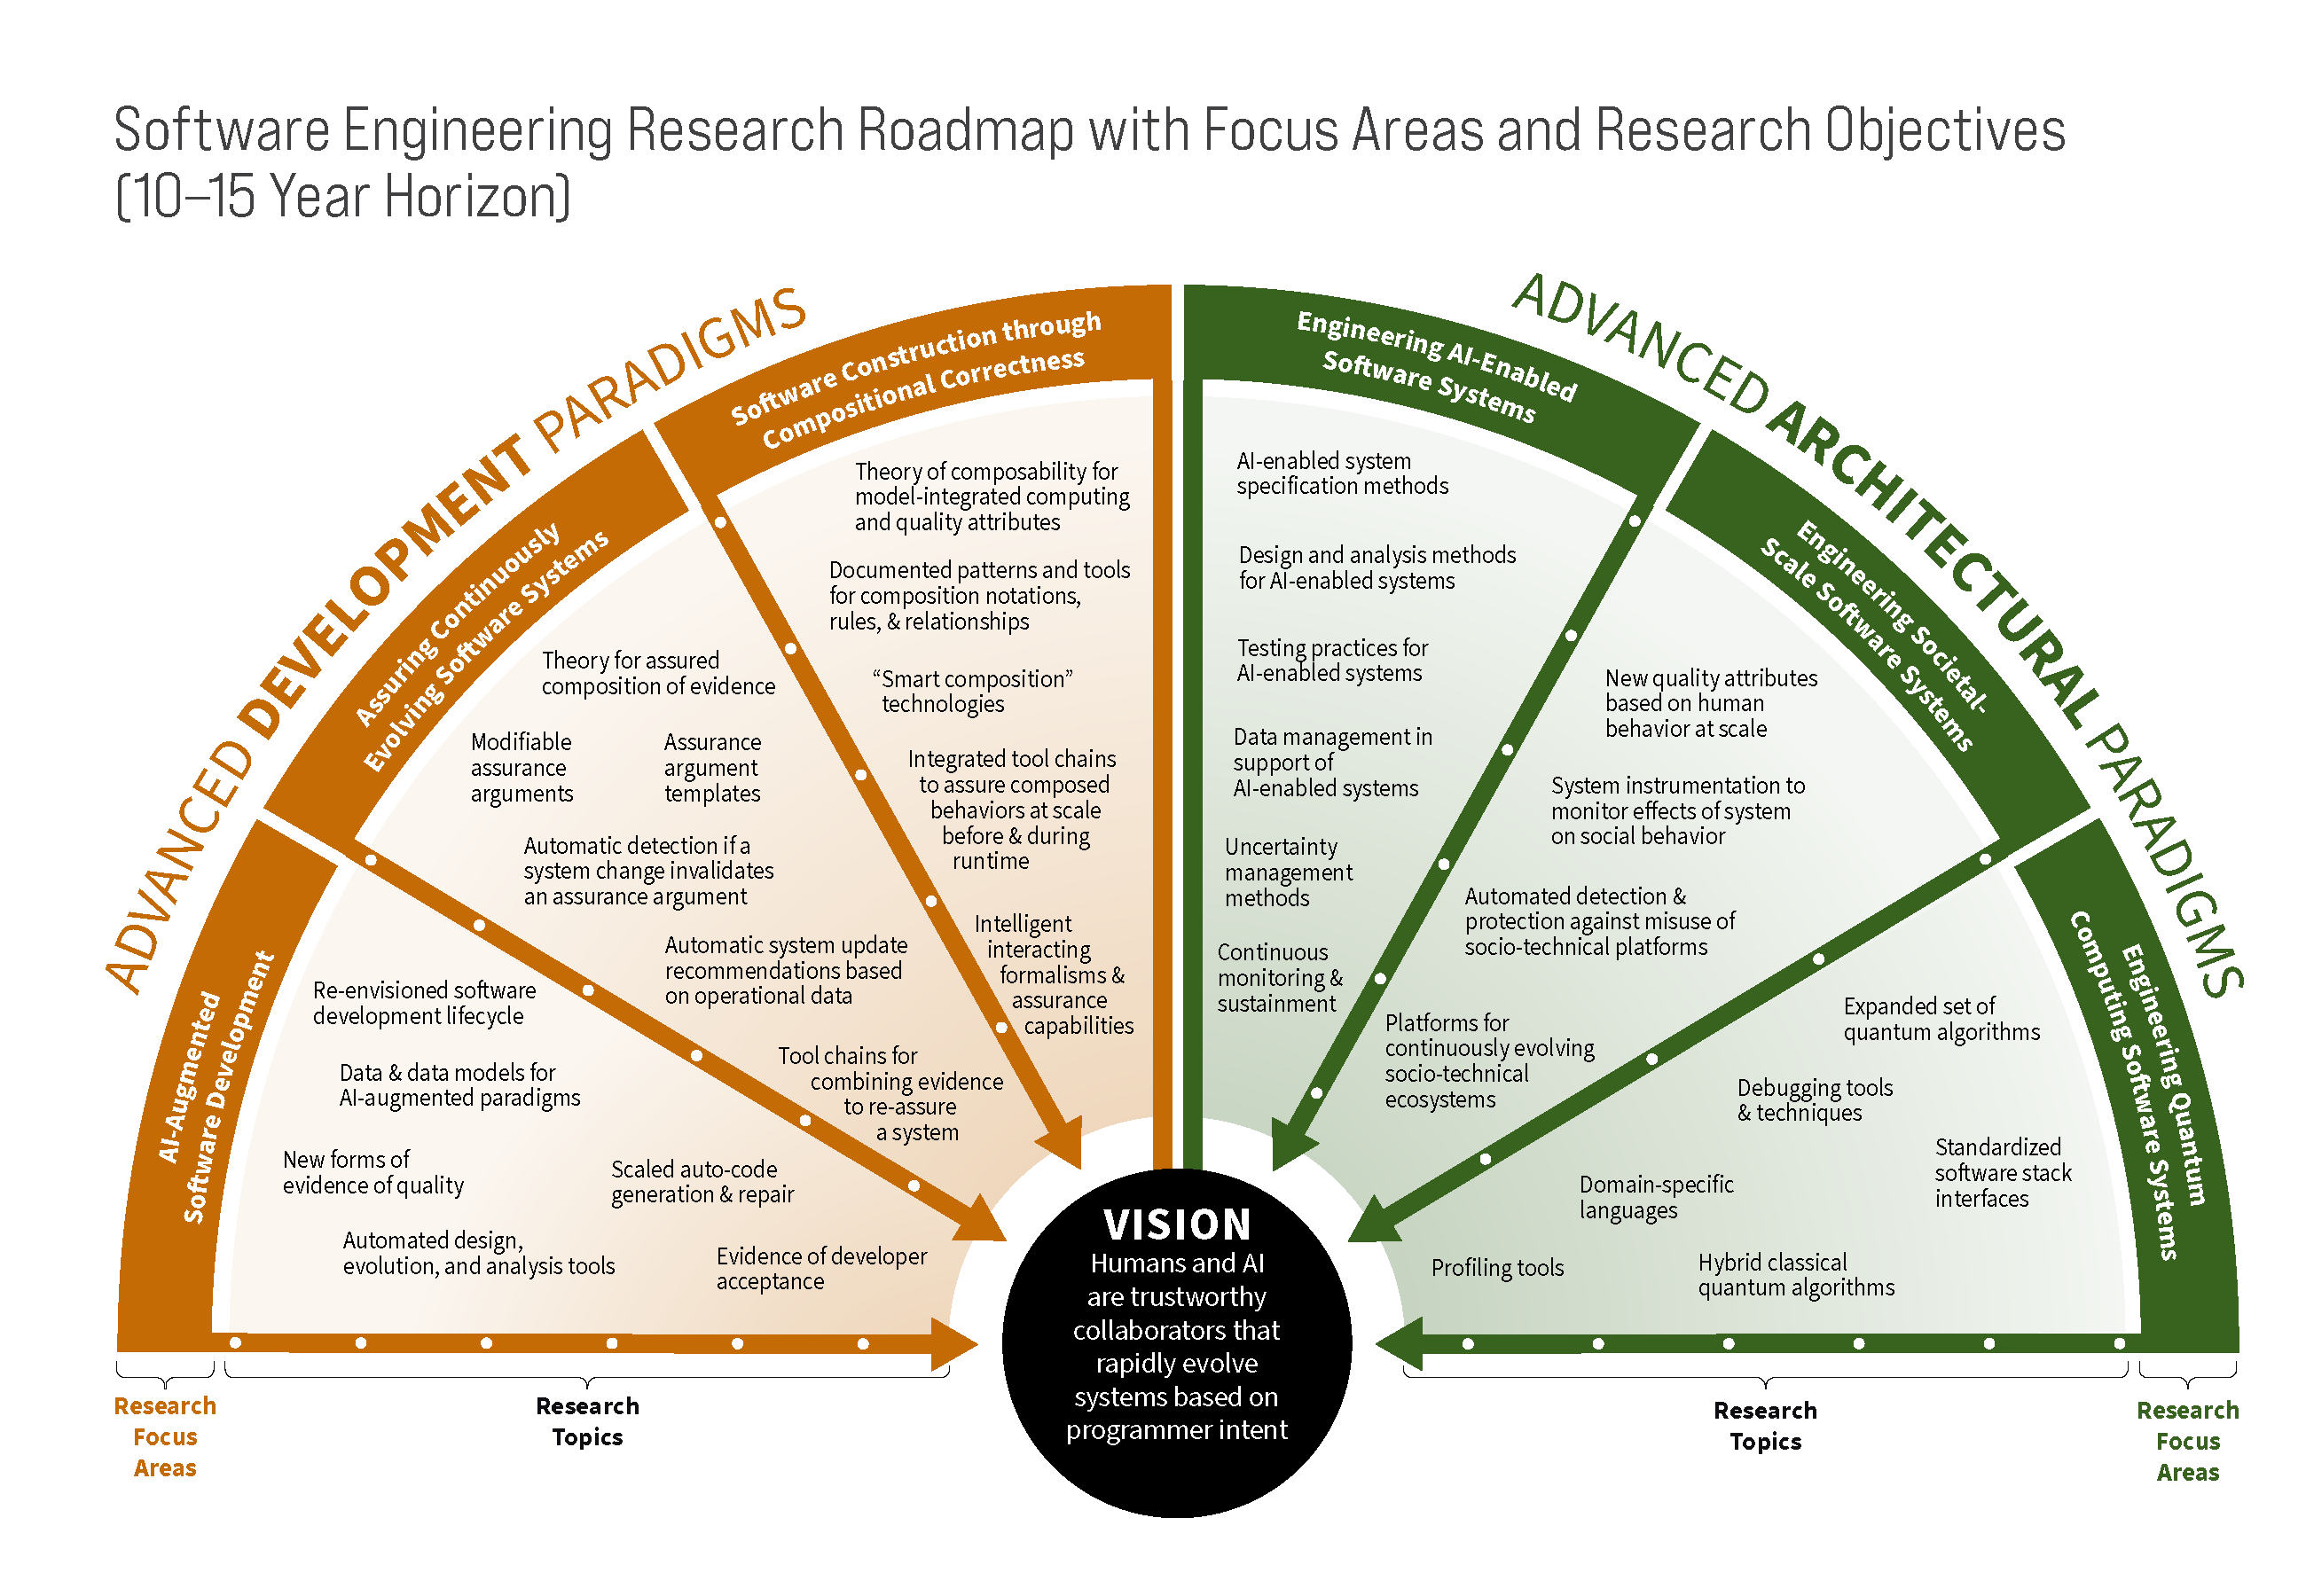 Software Engineering Research Roadmap with Focus Areas and Research Objectives (10-15 Year Horizon)